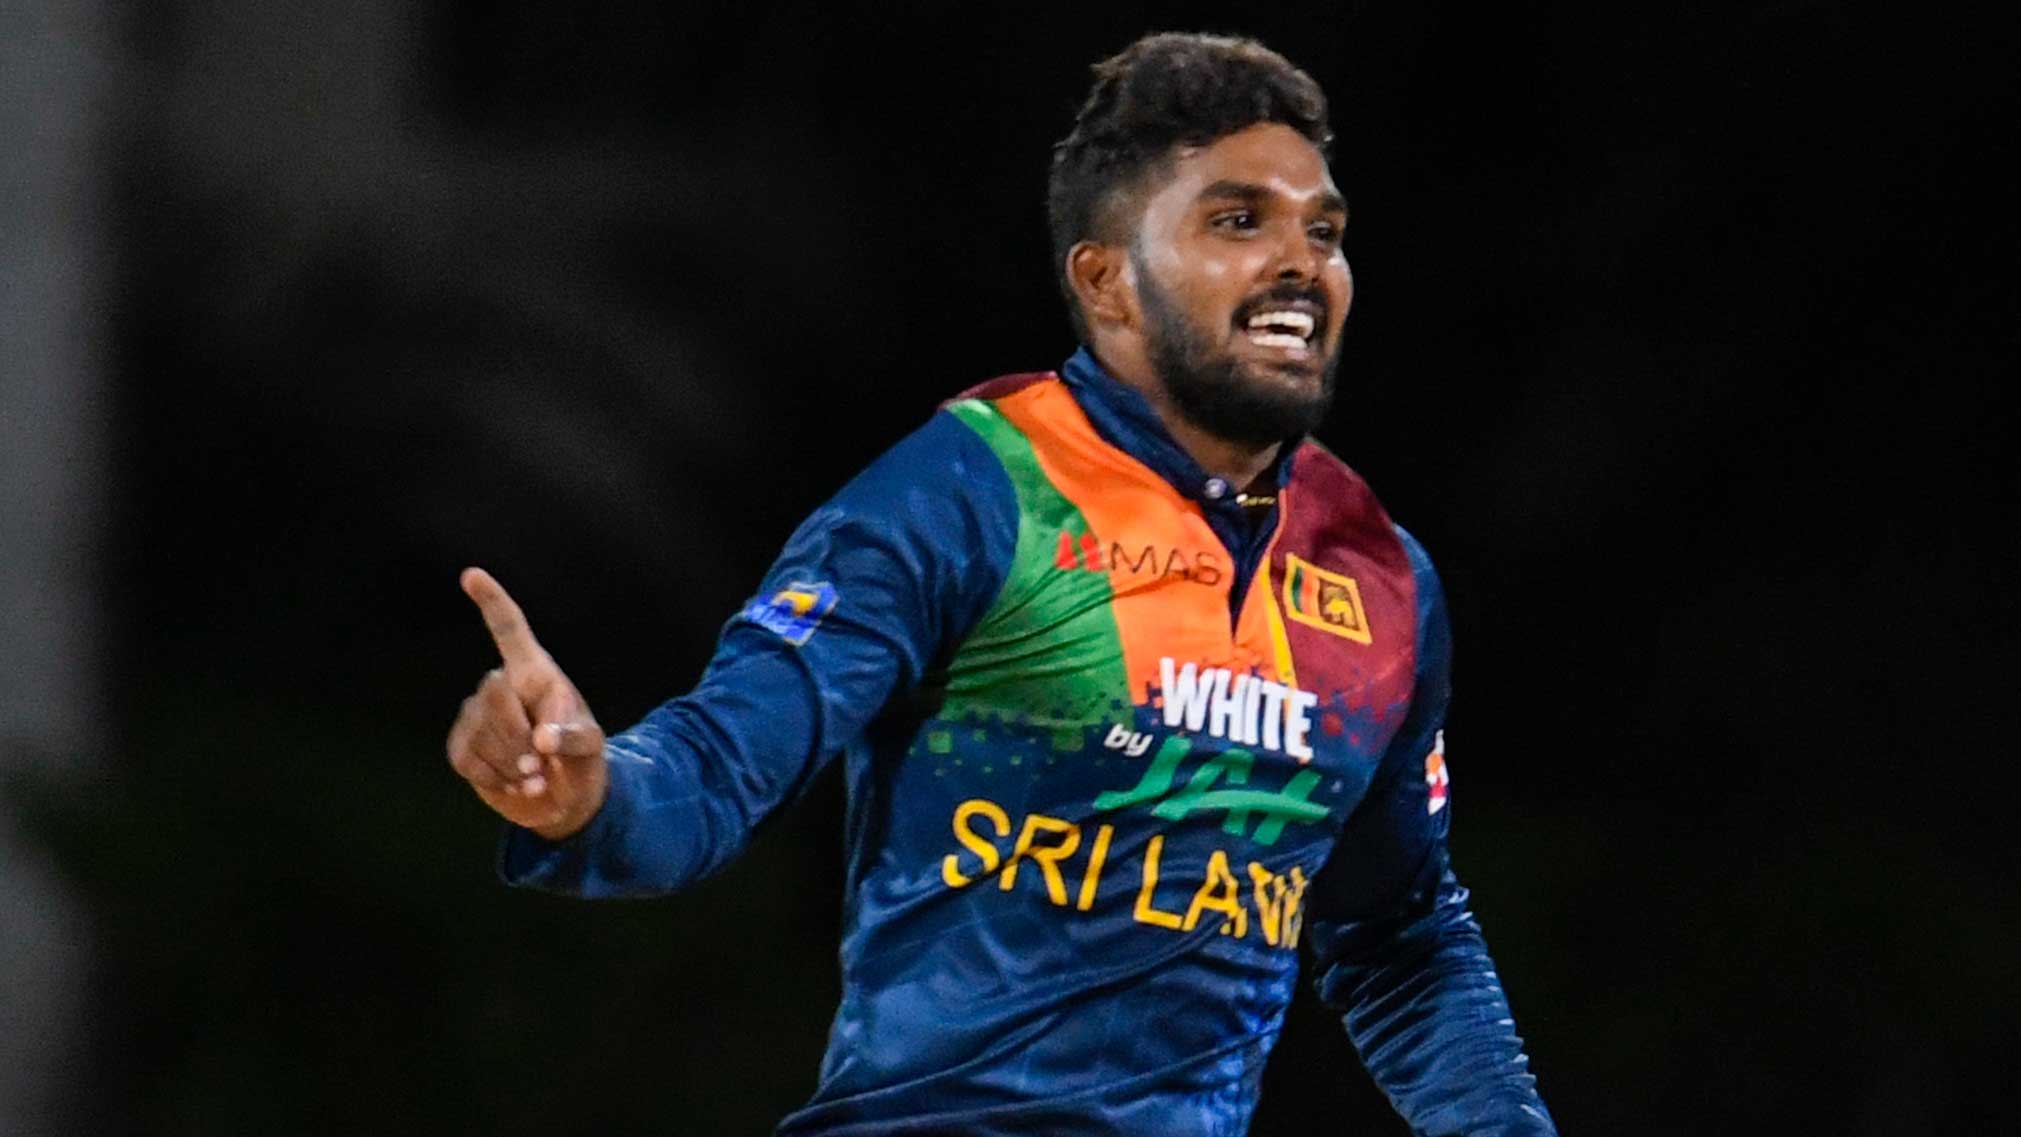 Reports | Wanindu Hasaranga remains under medical observation, unlikely to play 3rd ODI vs AUS